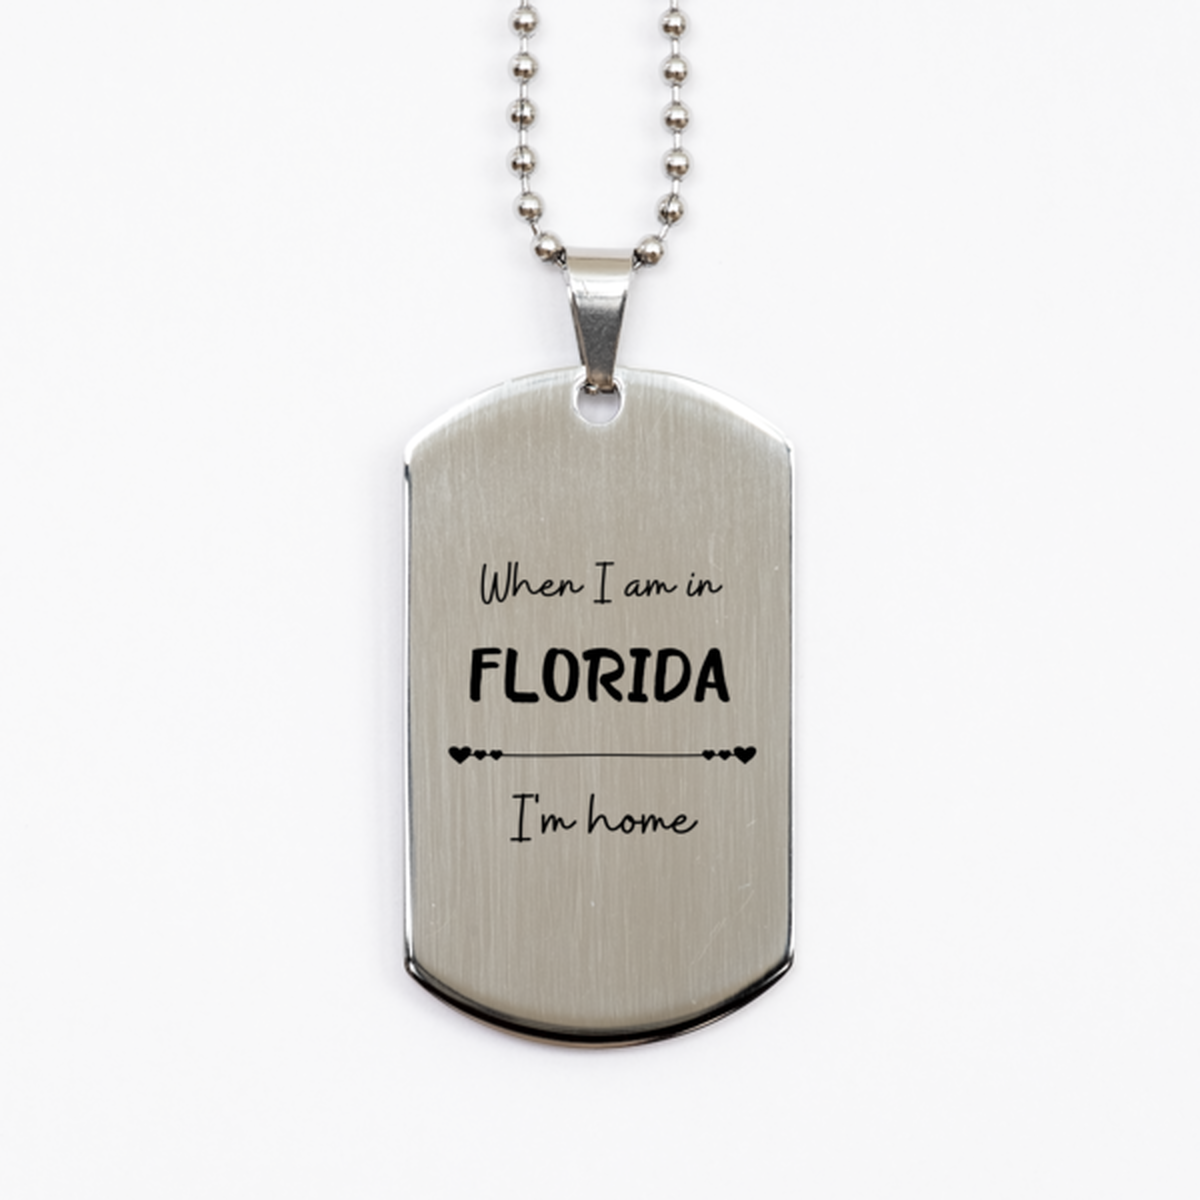 When I am in Florida I'm home Silver Dog Tag, Cheap Gifts For Florida, State Florida Birthday Gifts for Friends Coworker